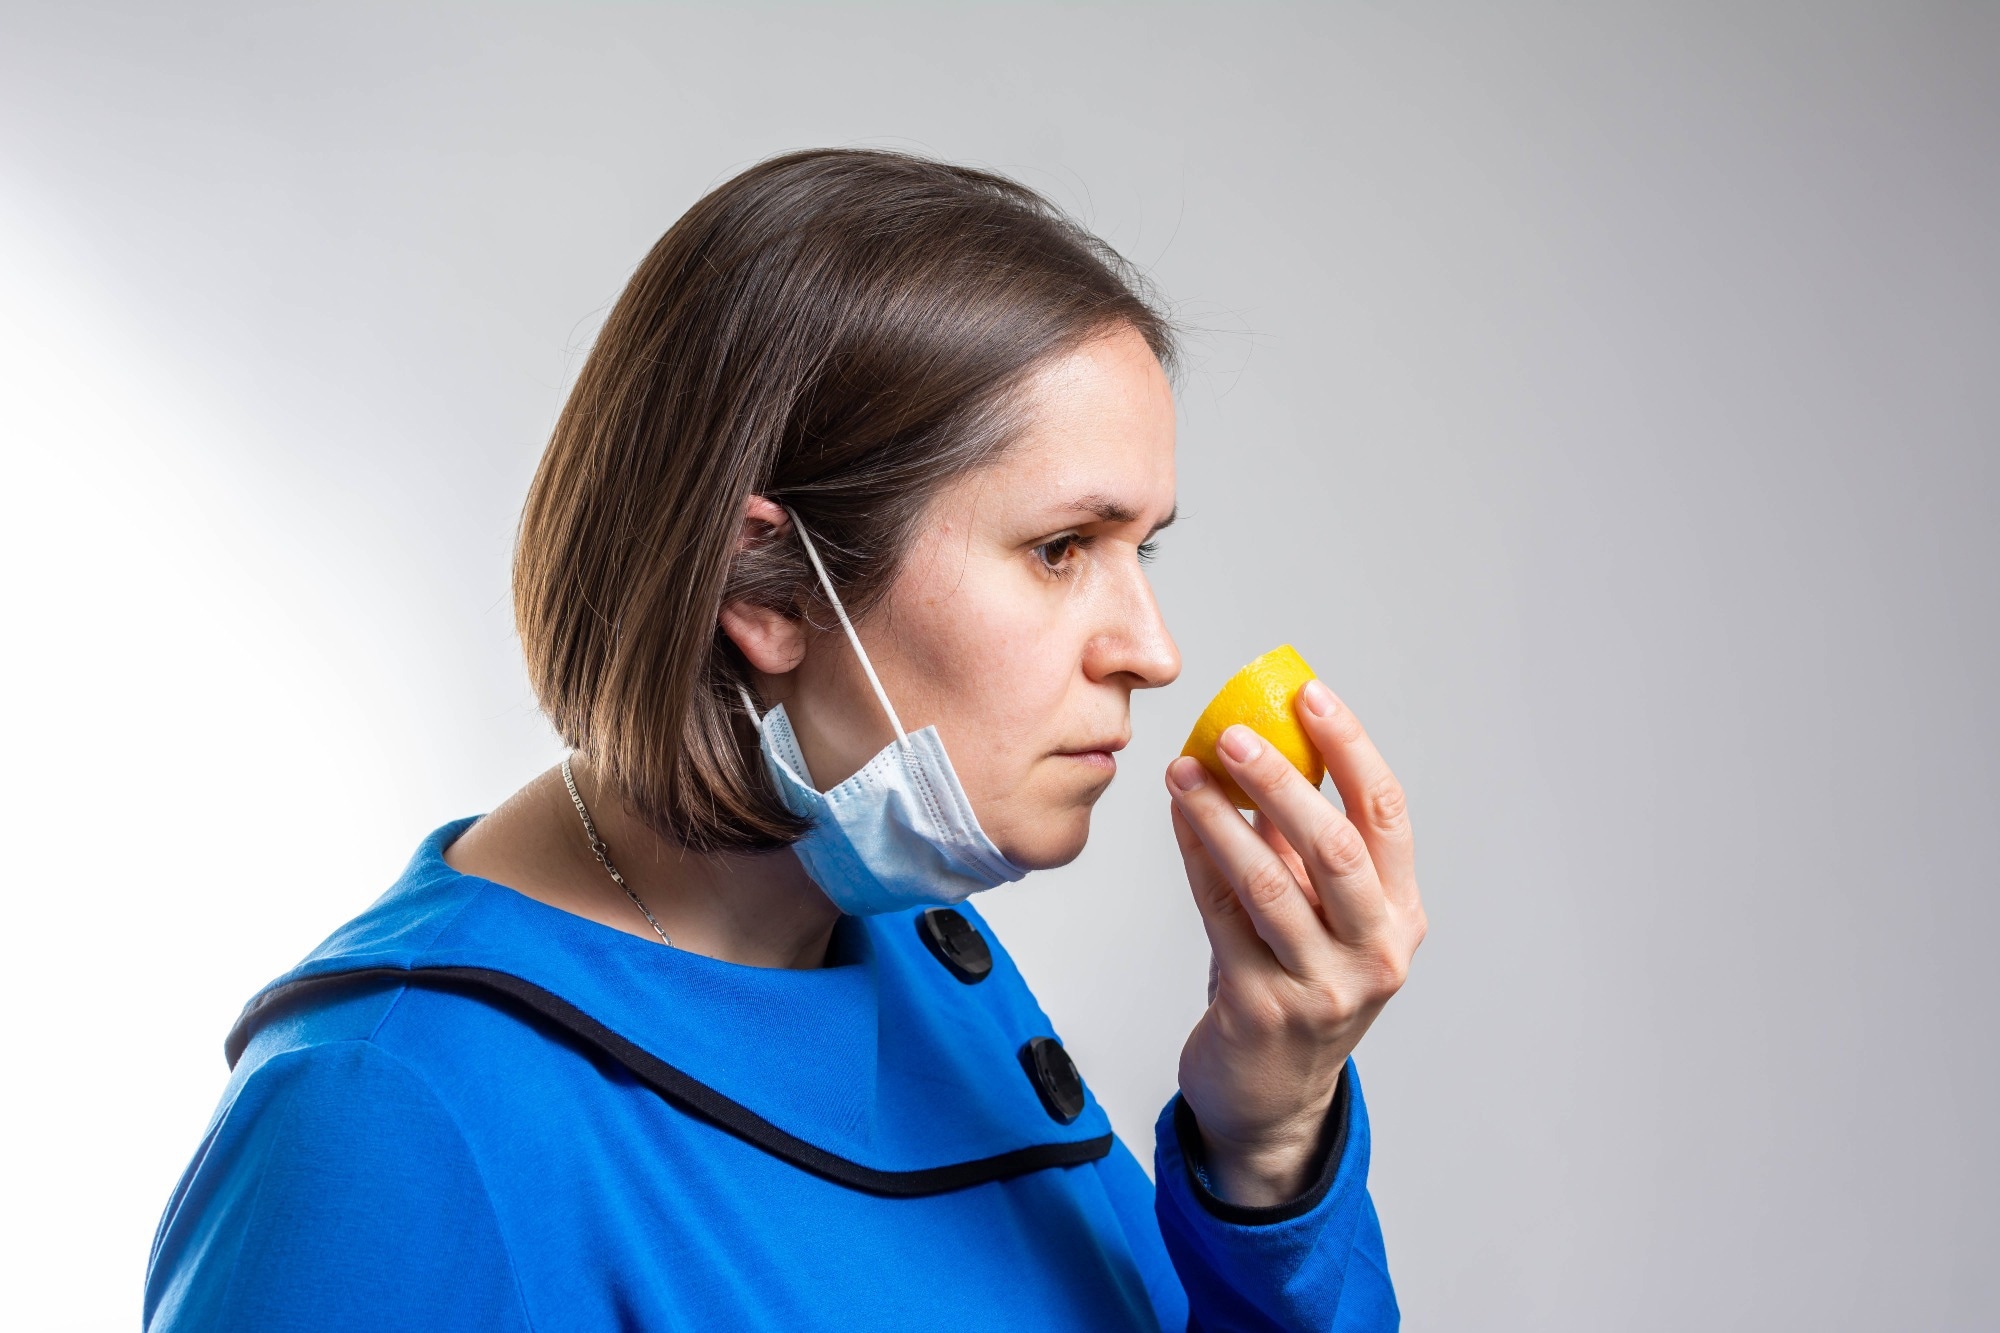 Study: Sociodemographic Characteristics and Comorbidities of Patients With Long COVID and Persistent Olfactory Dysfunction. Image Credit: Nenad Cavoski/Shutterstock